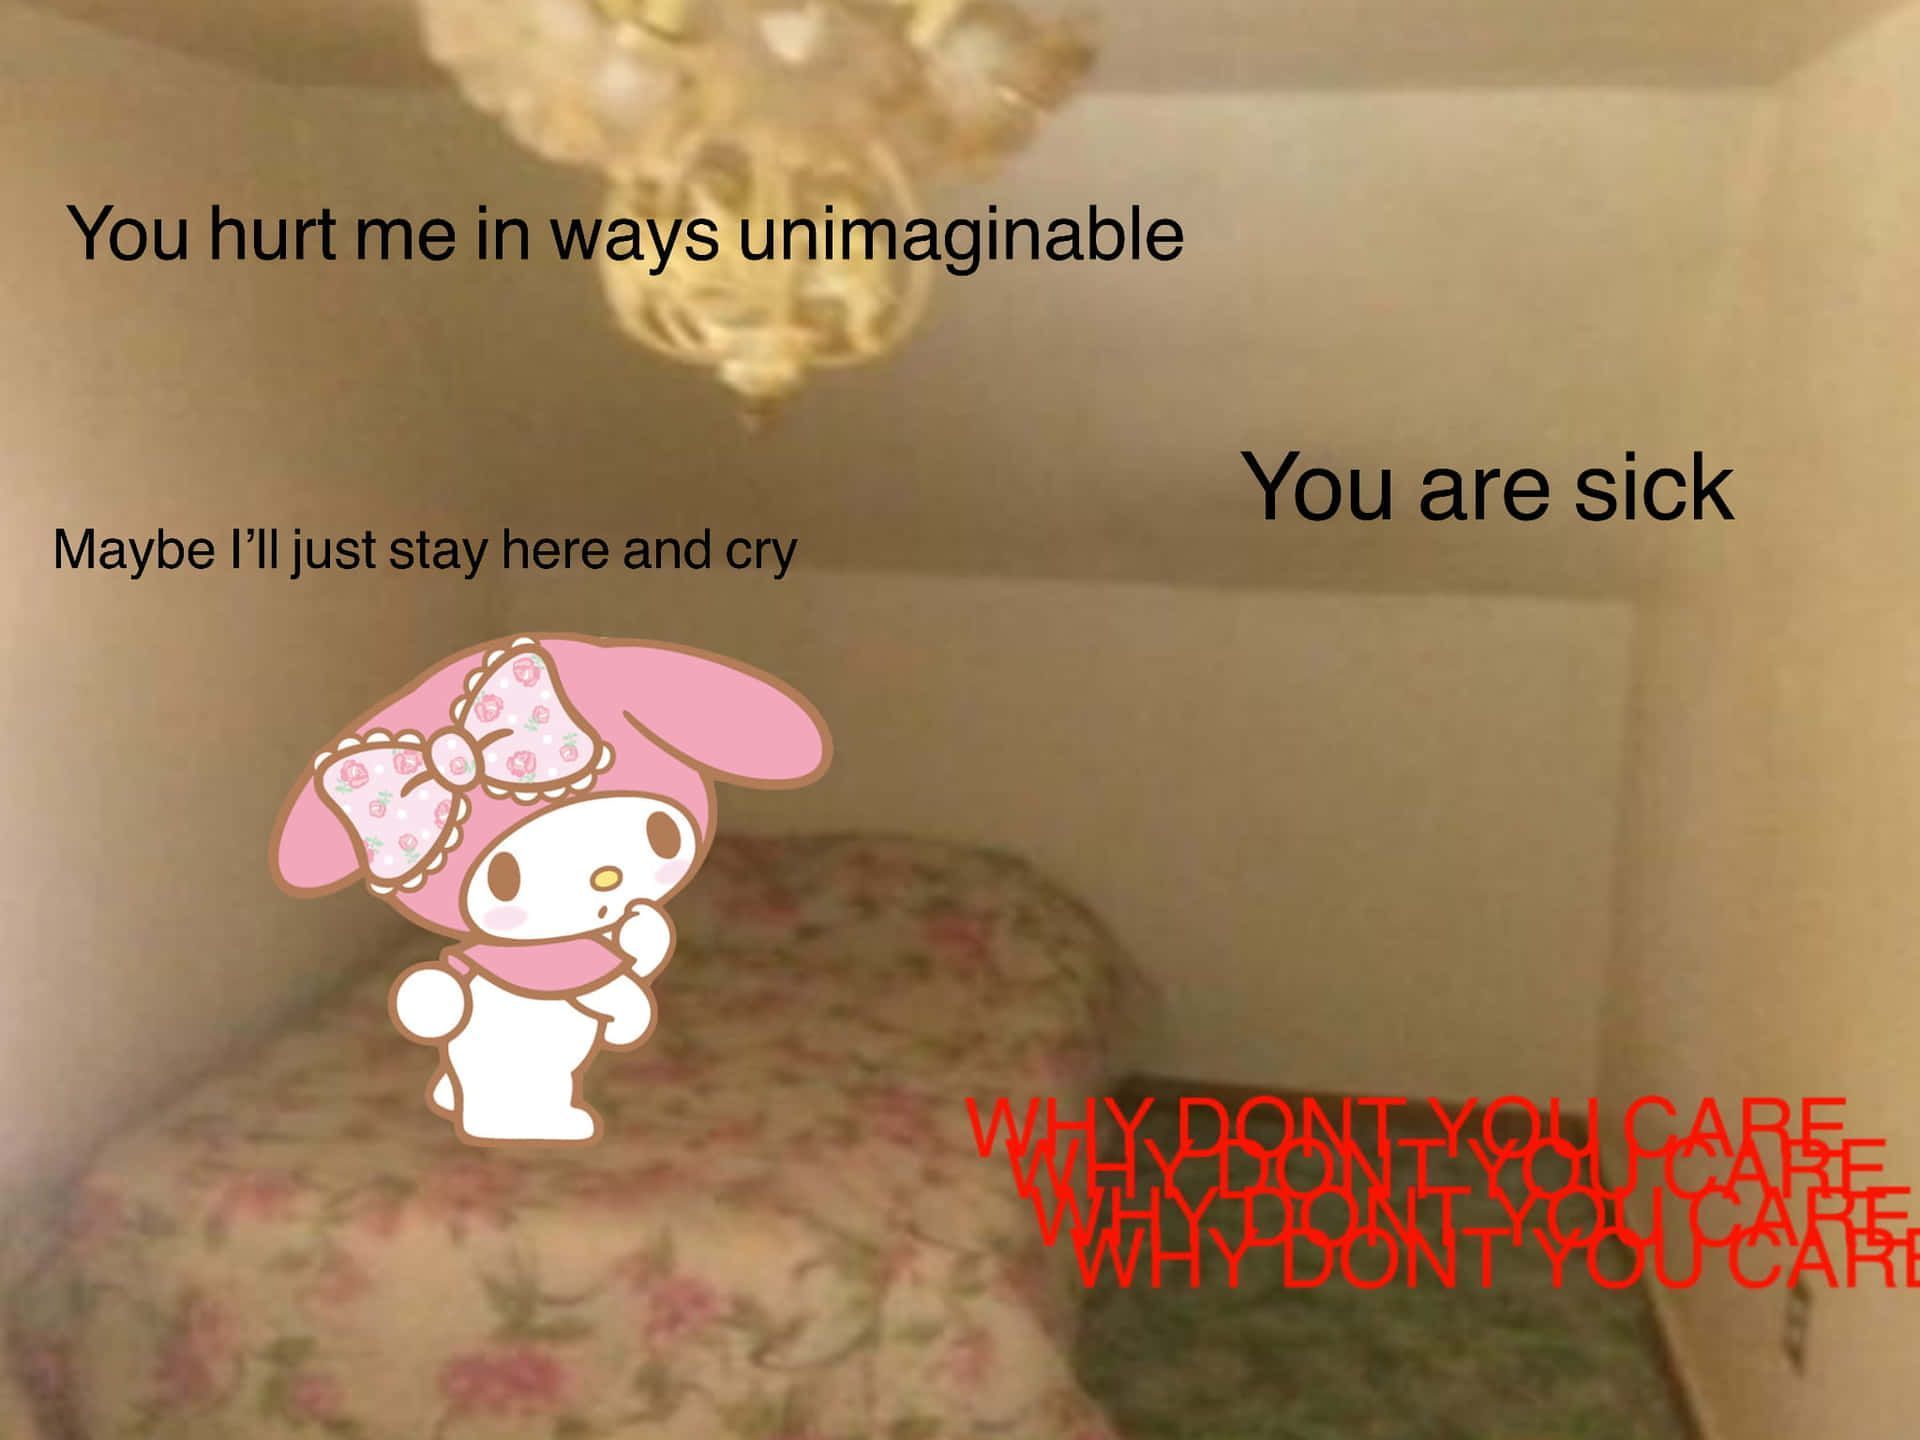 A My Melody doll in a cardboard box with the caption 